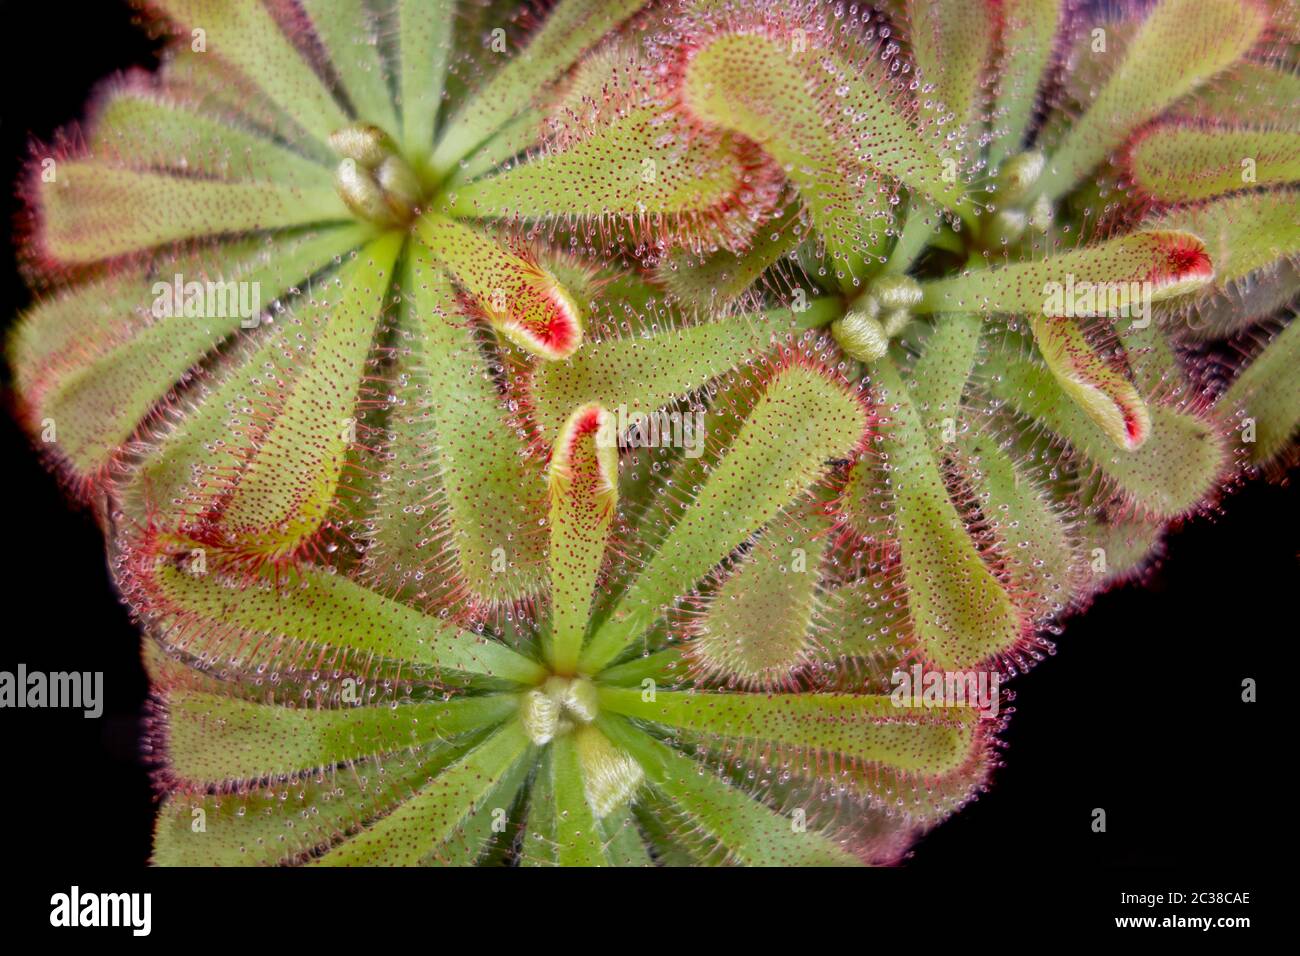 Sundew Plants High Resolution Stock Photography And Images Alamy